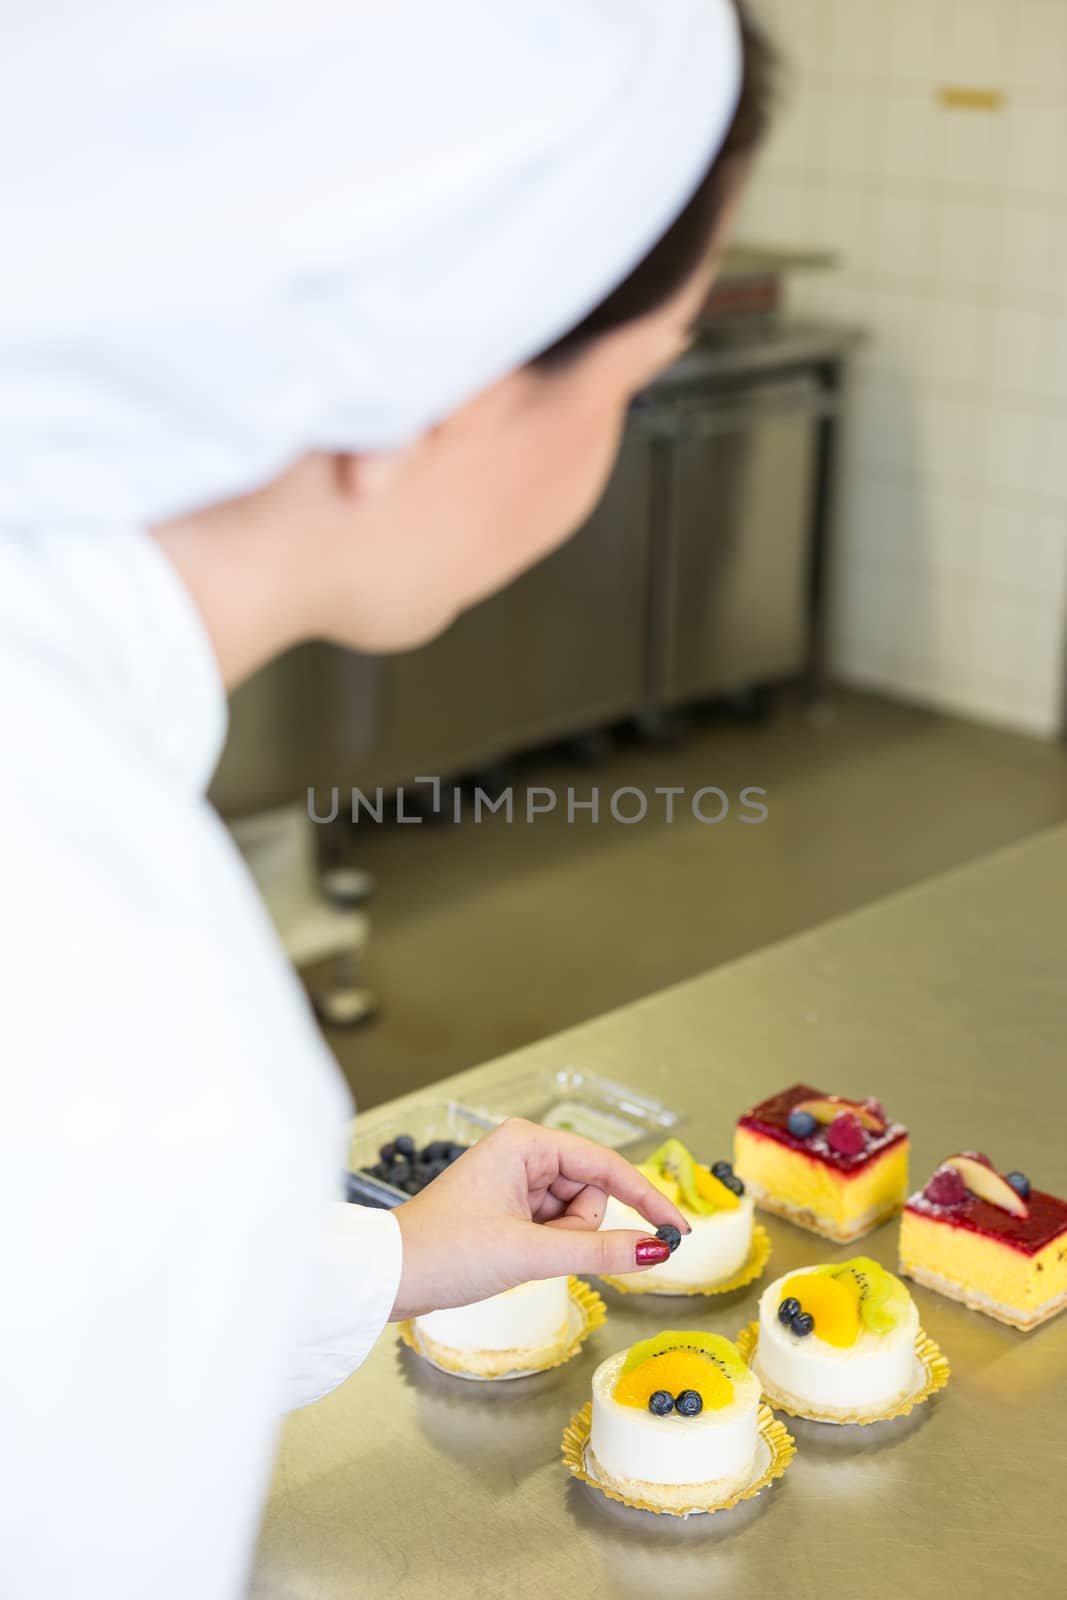 Confectioner preparing cakes at bakery or confectionery by ikonoklast_fotografie